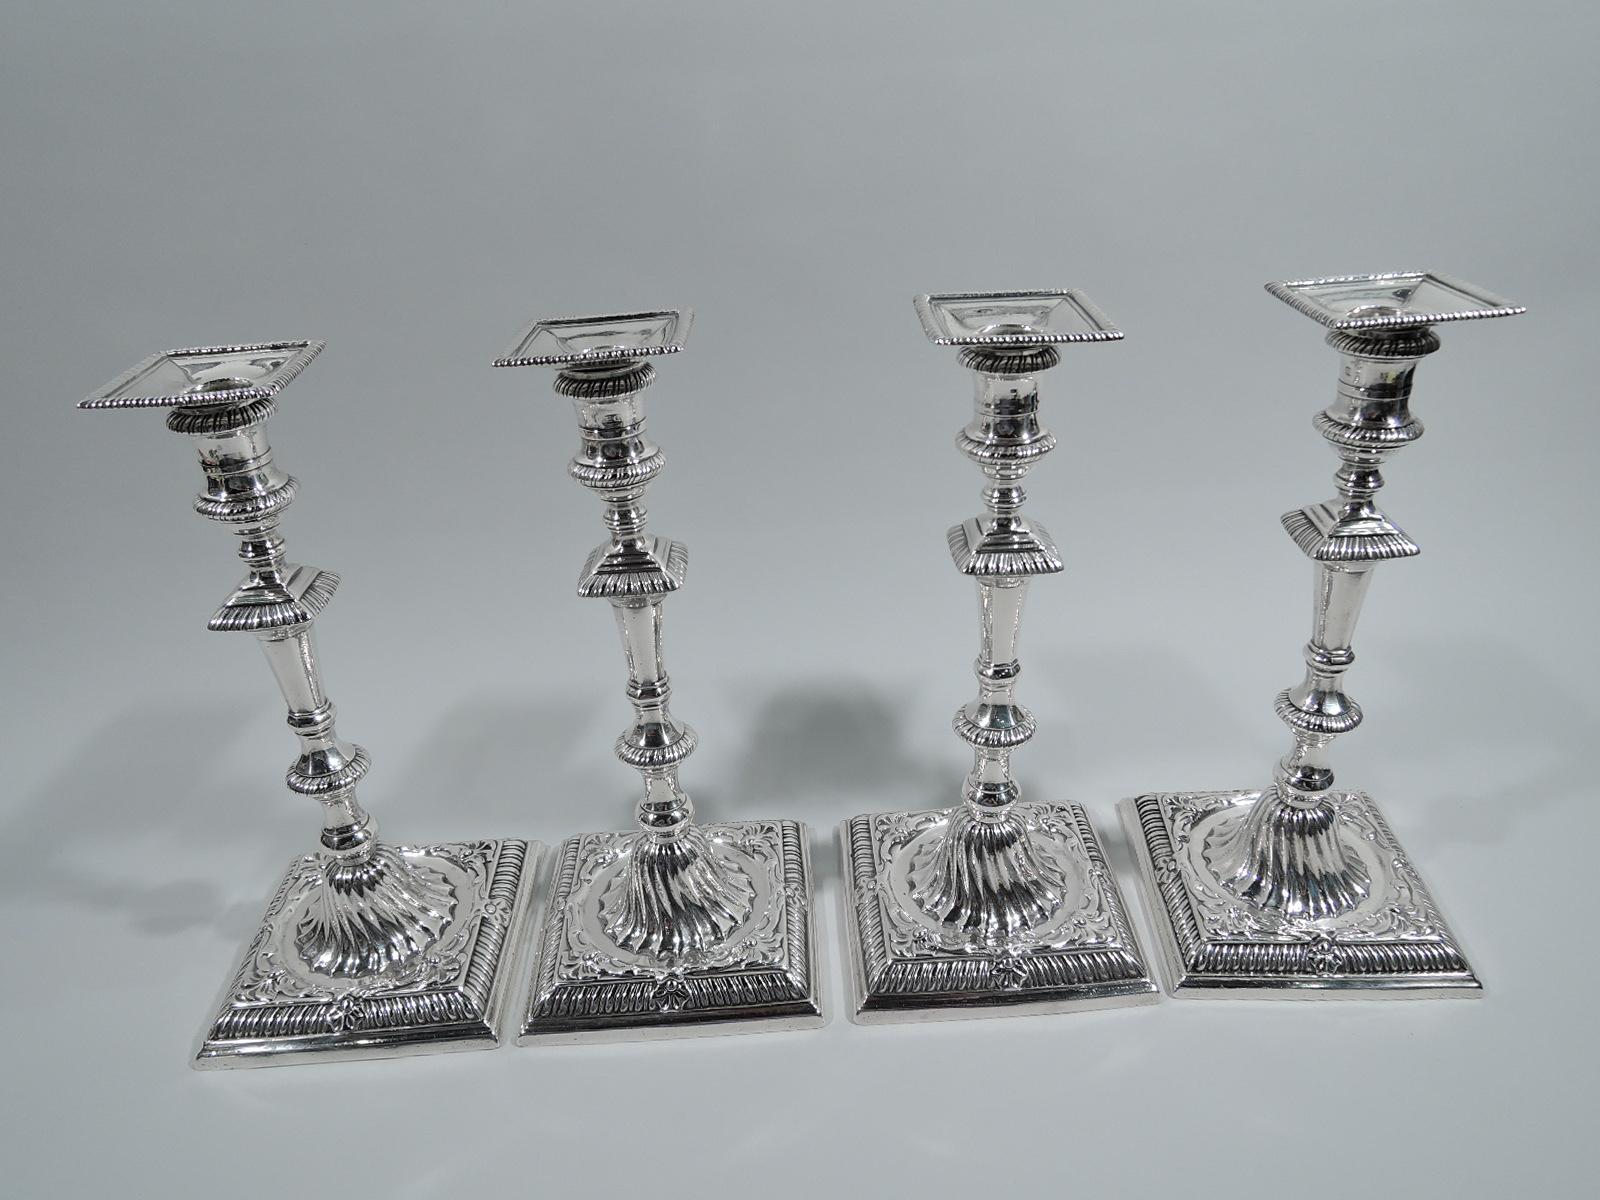 Set of 4 George III sterling silver candlesticks. Made by Ebenezer Coker in London in 1762. Each: Faceted and knopped shaft on domed and twisted-fluted foot mounted to circle set in square foot. Spool socket with detachable square bobeche.